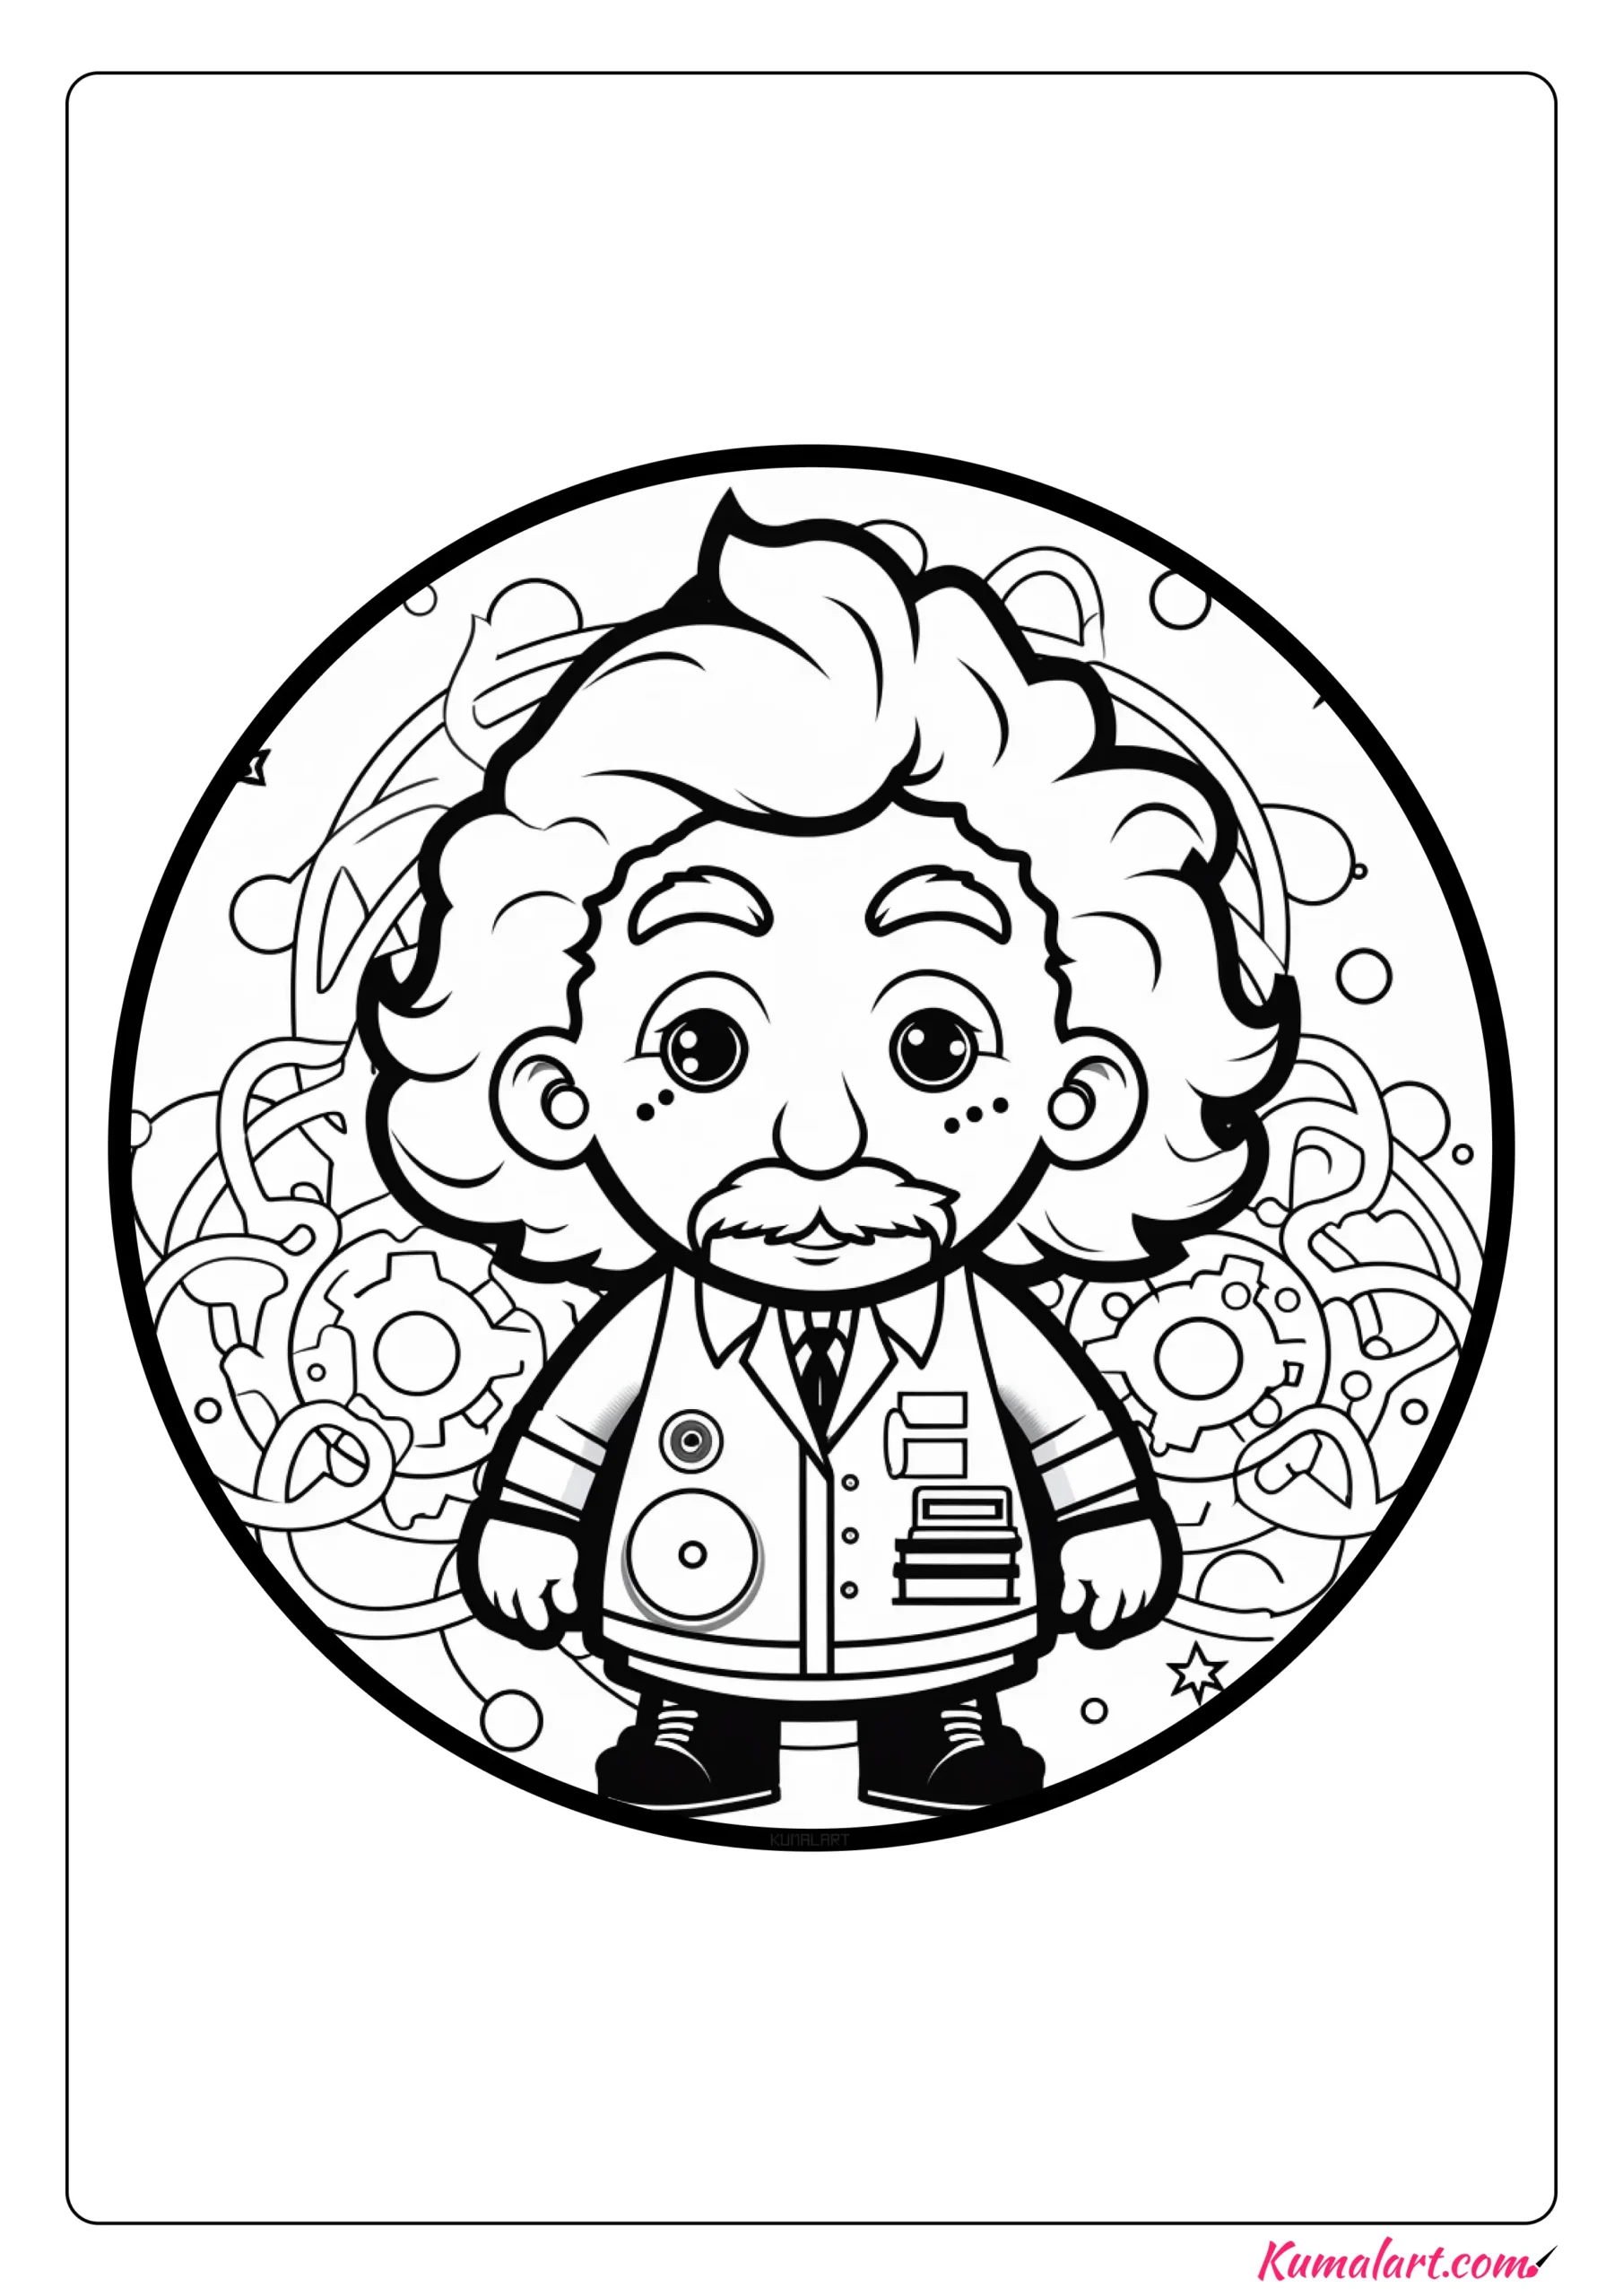 Albert Einstein Coloring Page For Kids